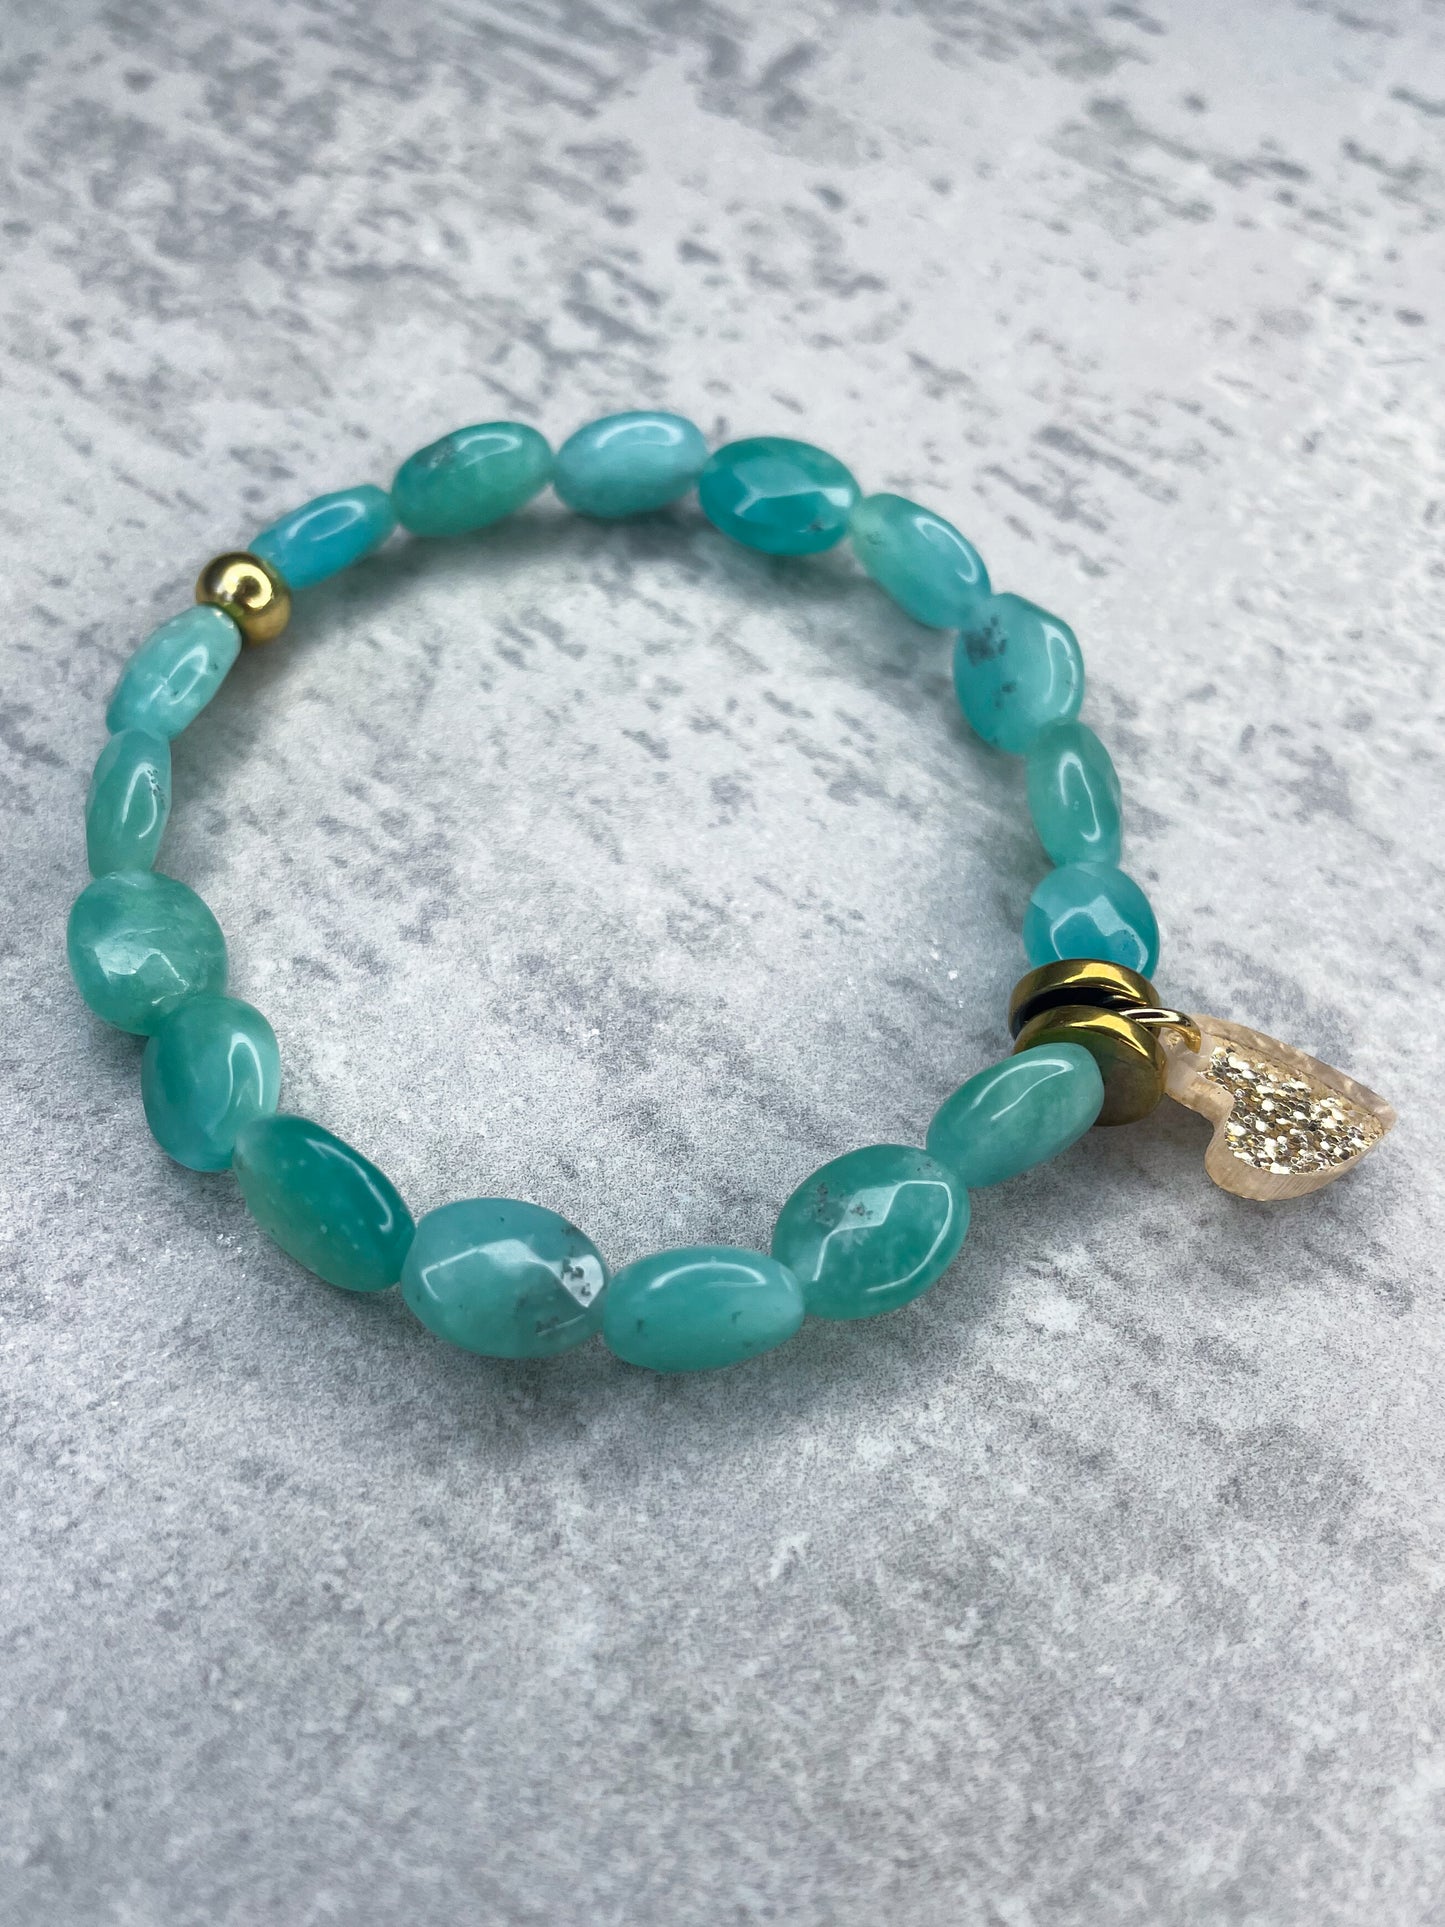 Faceted glass bead bracelet with heart